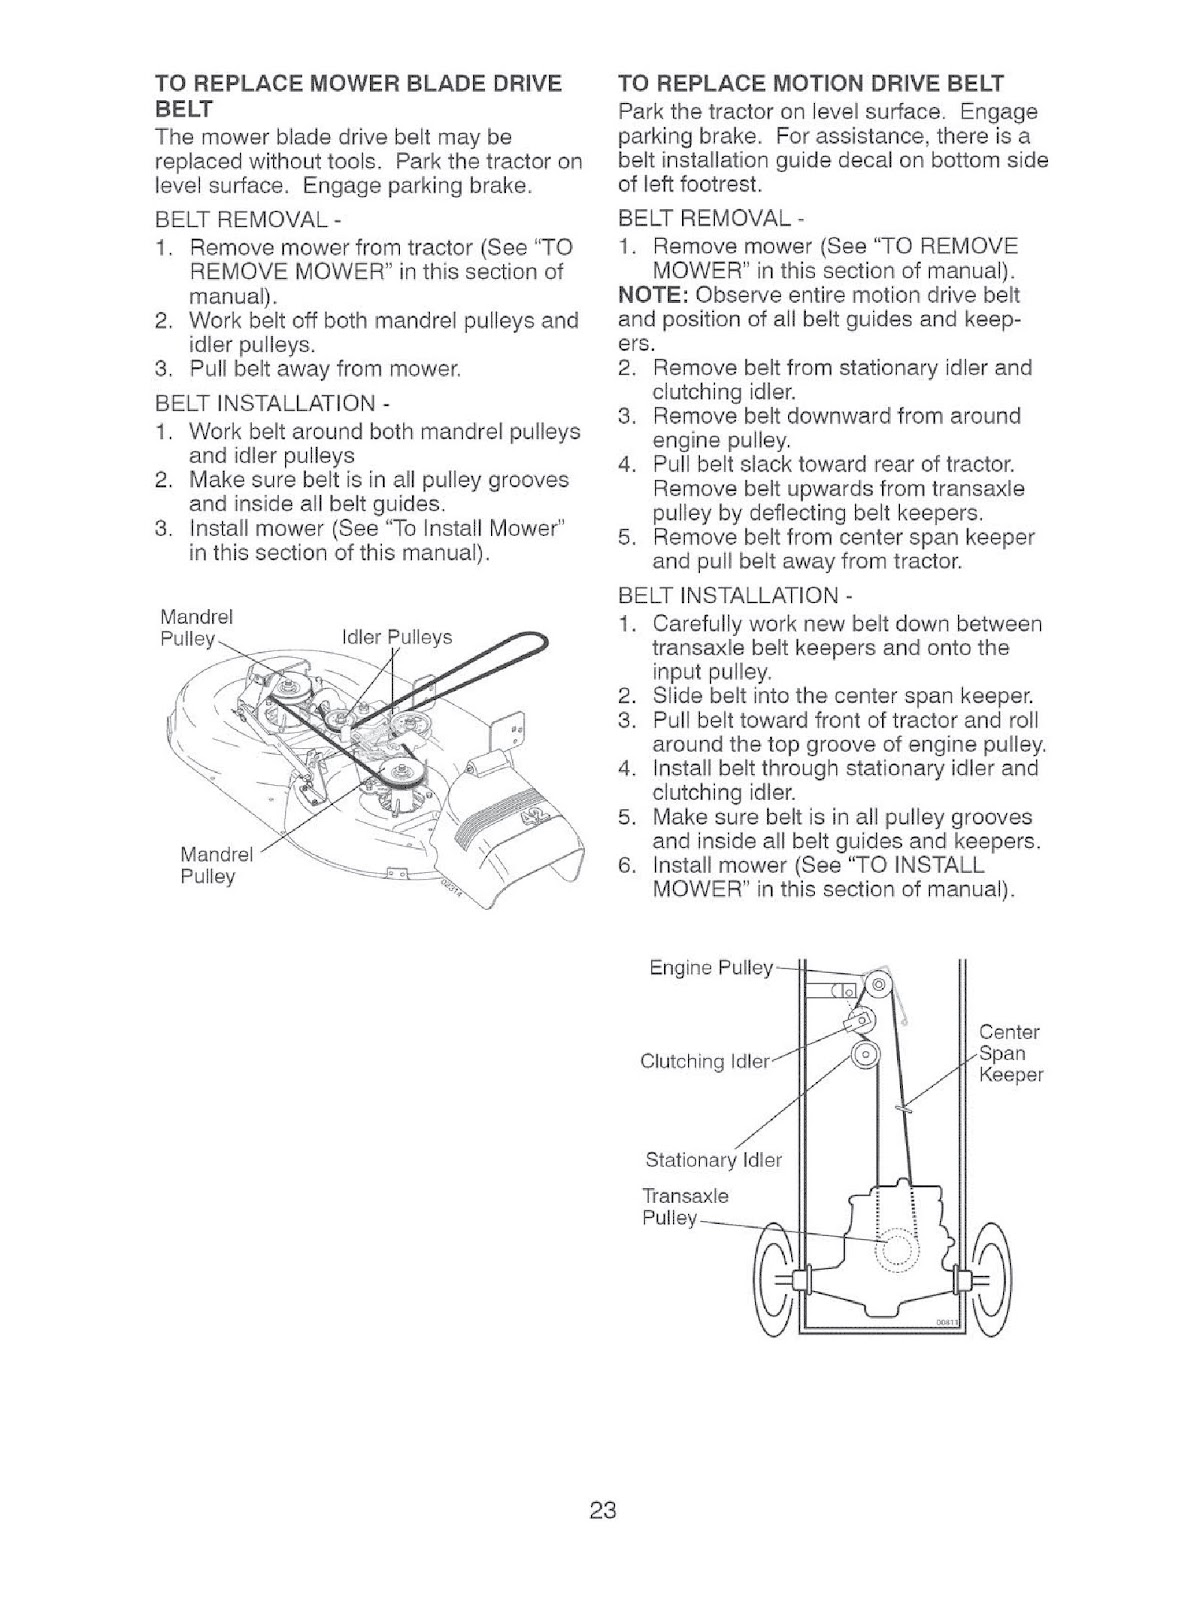 how to replace craftsman riding lawn mower belts